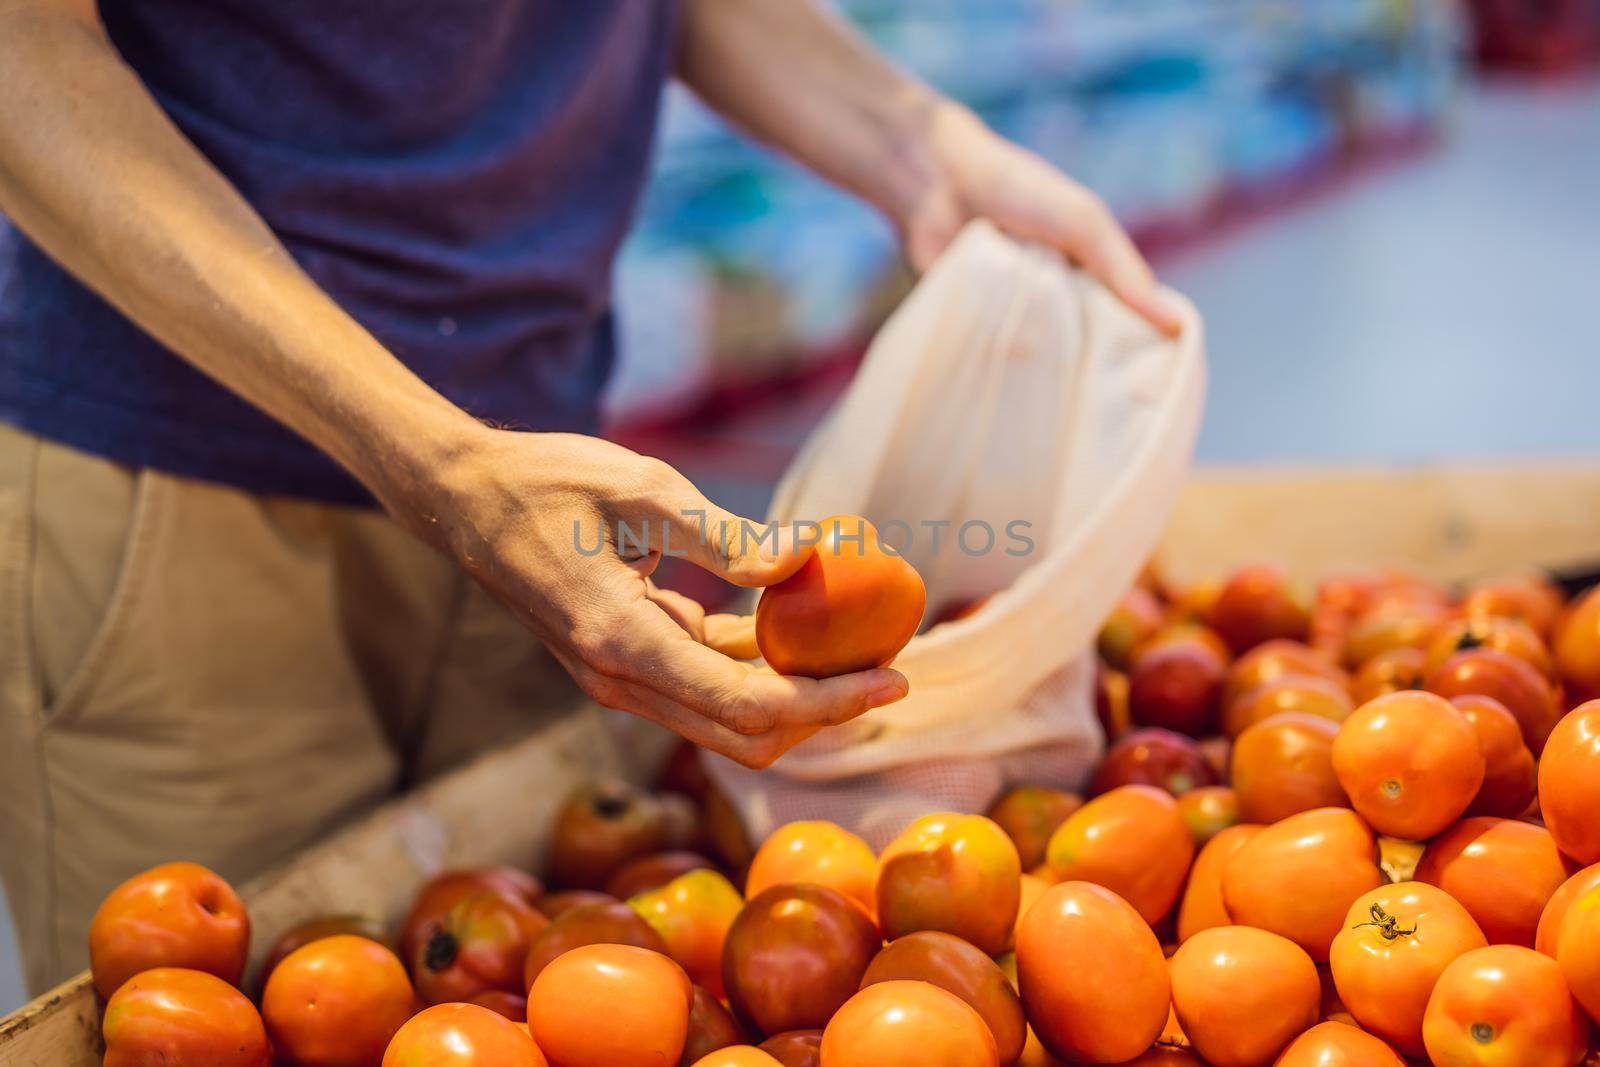 Man chooses tomatoes in a supermarket without using a plastic bag. Reusable bag for buying vegetables. Zero waste concept by galitskaya